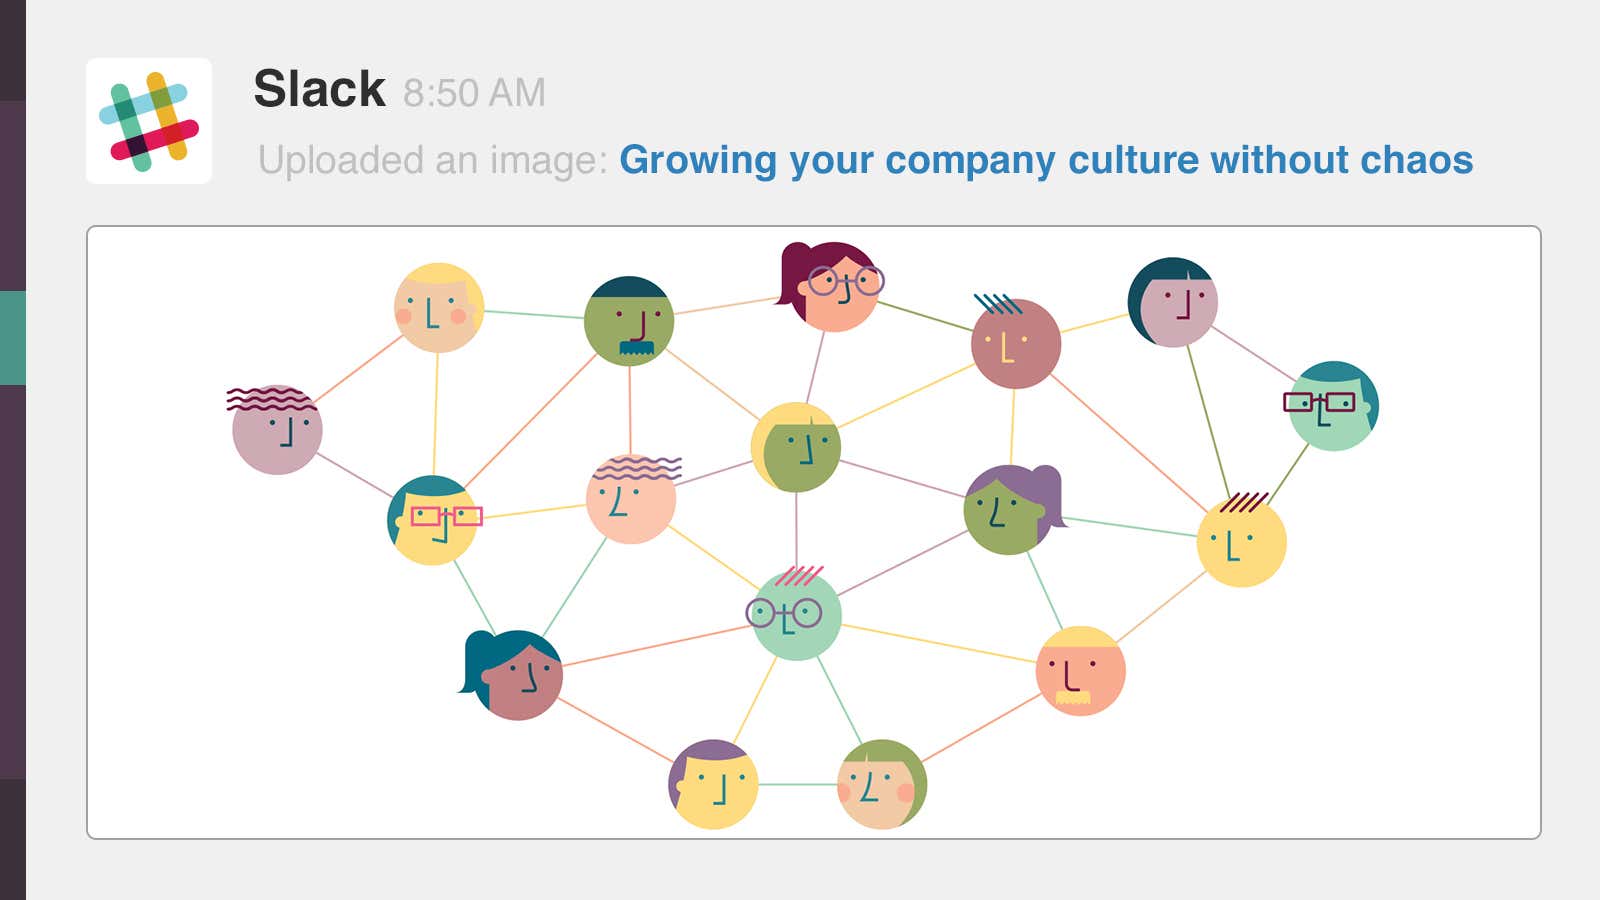 The building blocks of a company’s culture are its people.